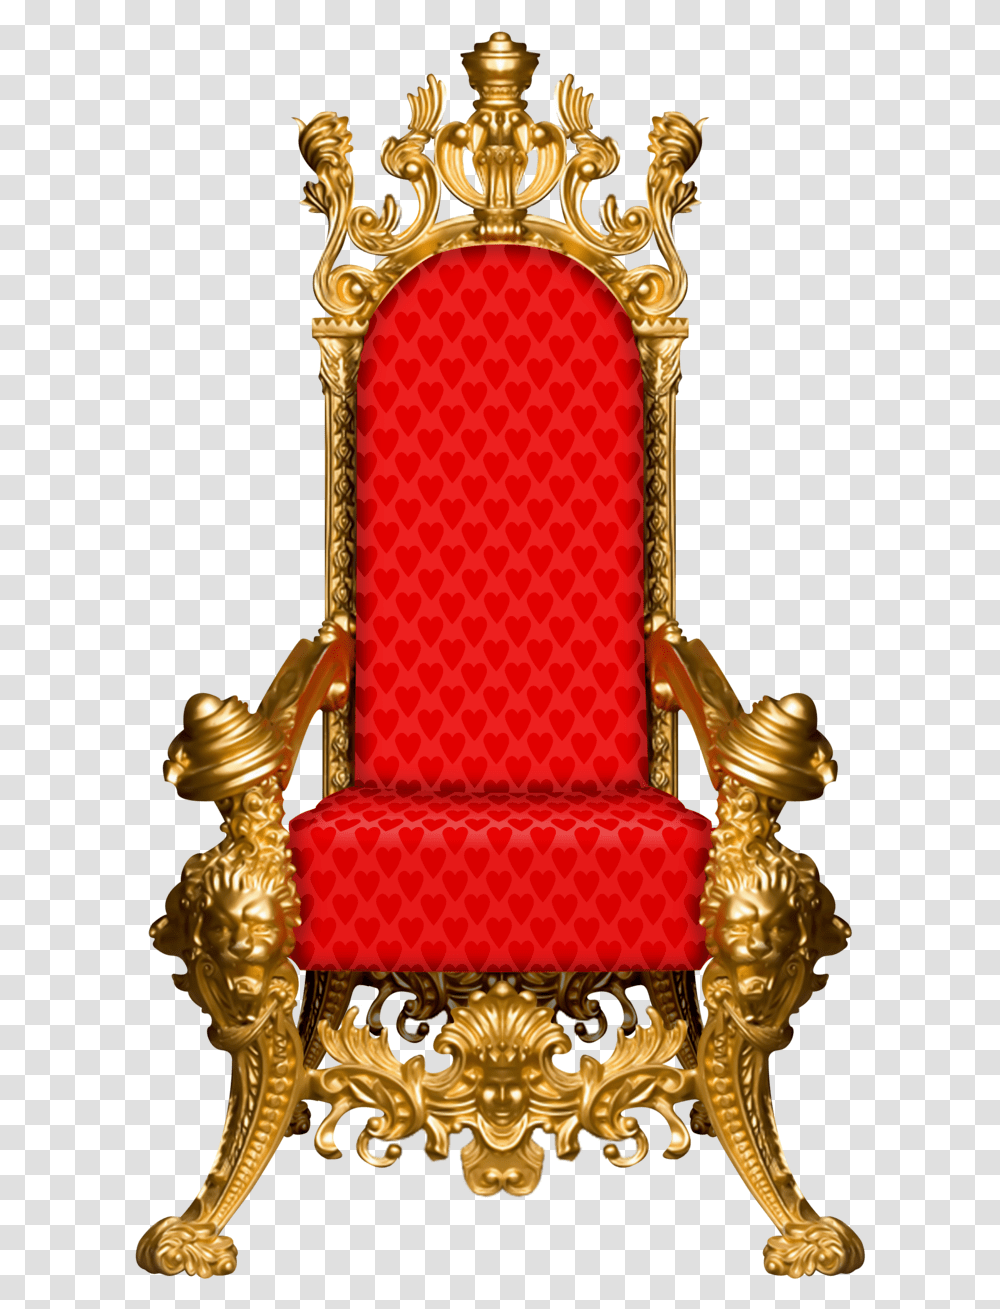 Throne Picture Chair Frame Red Download Free Image Background Throne, Furniture, Purse, Handbag, Accessories Transparent Png